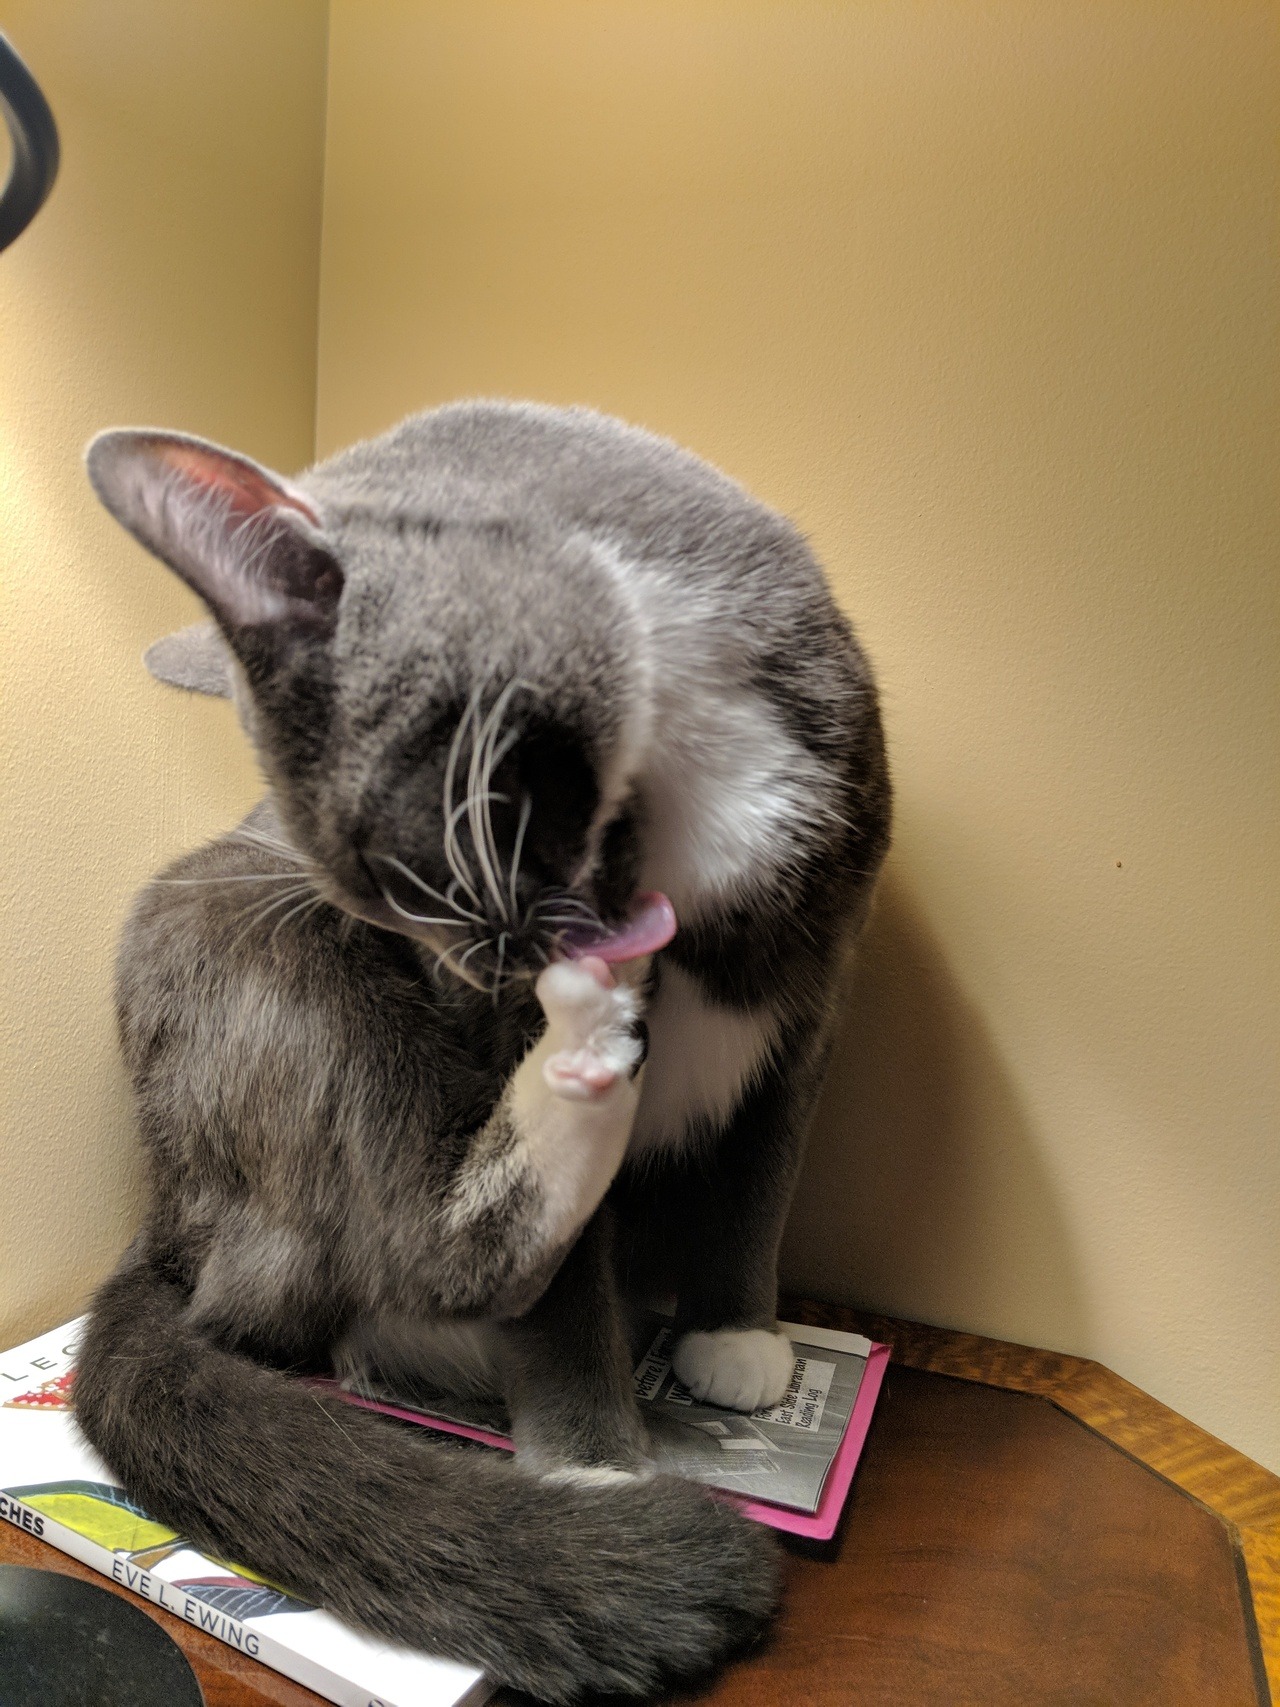 photo of a cat licking between her toes while sitting on a zine